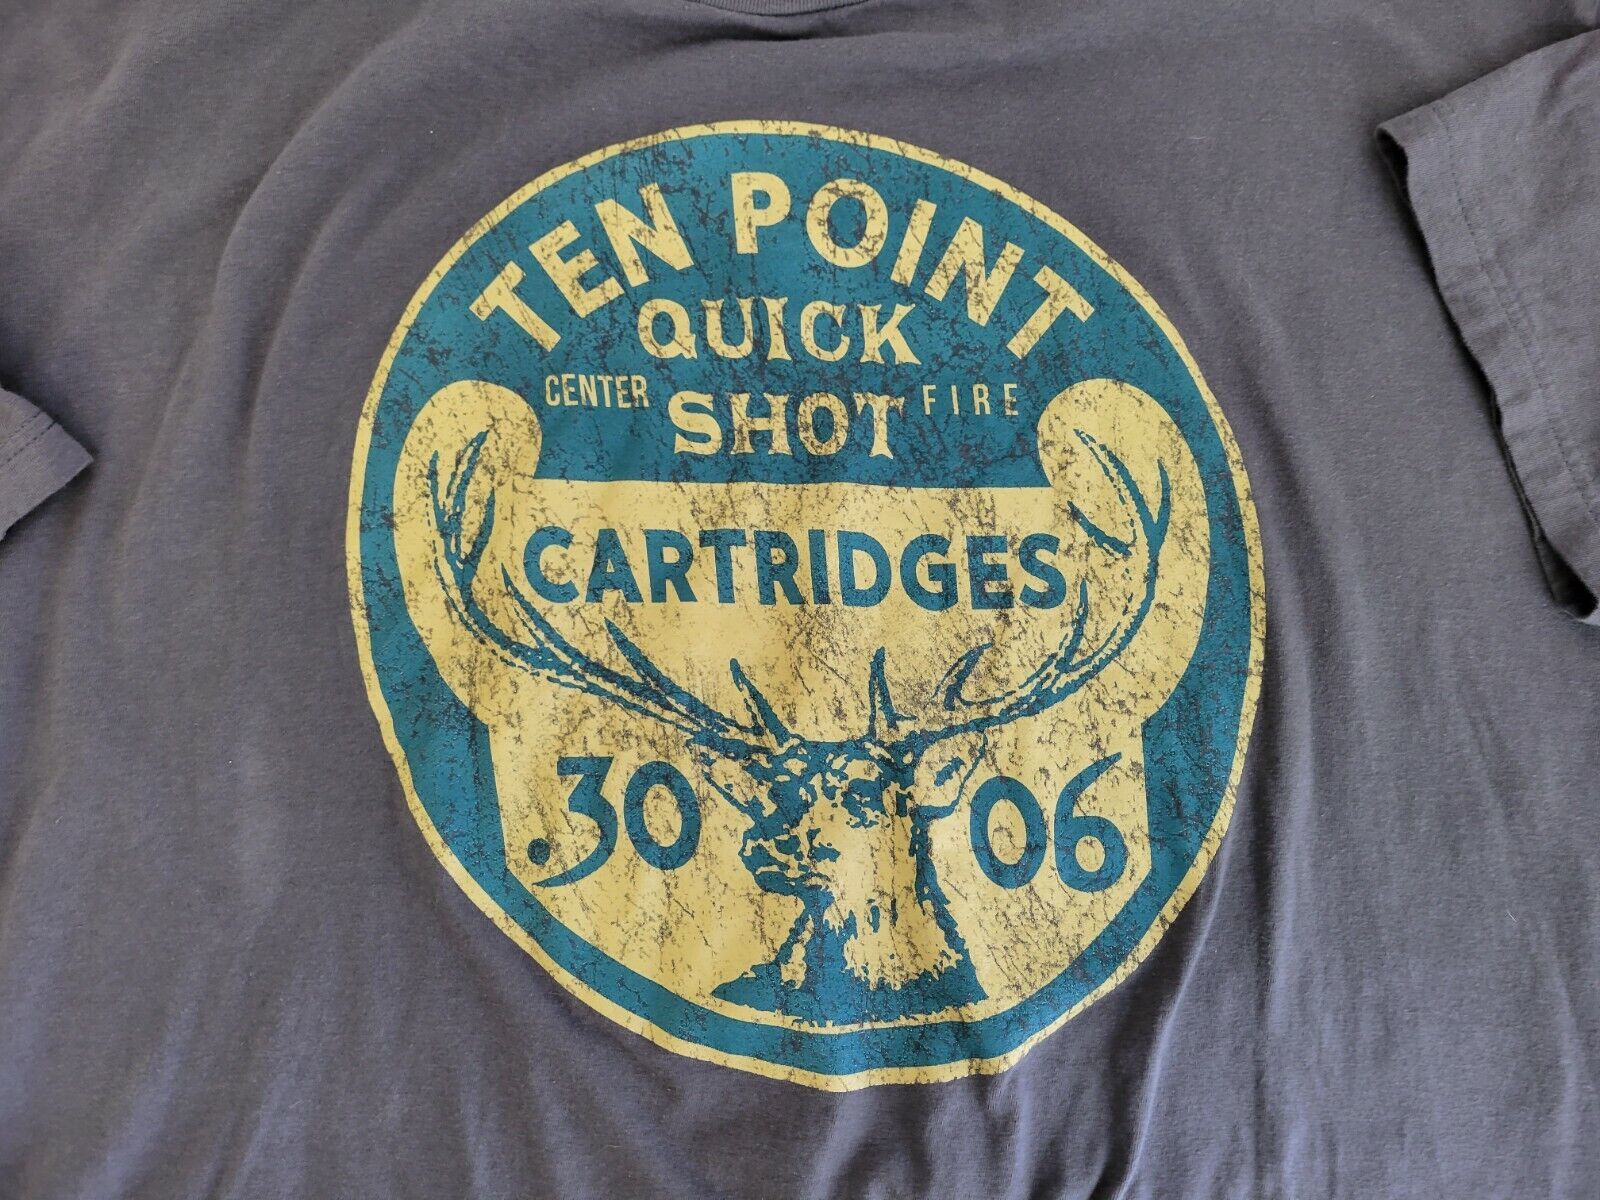 Primary image for Ten Point Quick Shot Cartridges T-Shirt Buck Optima Size 2XL